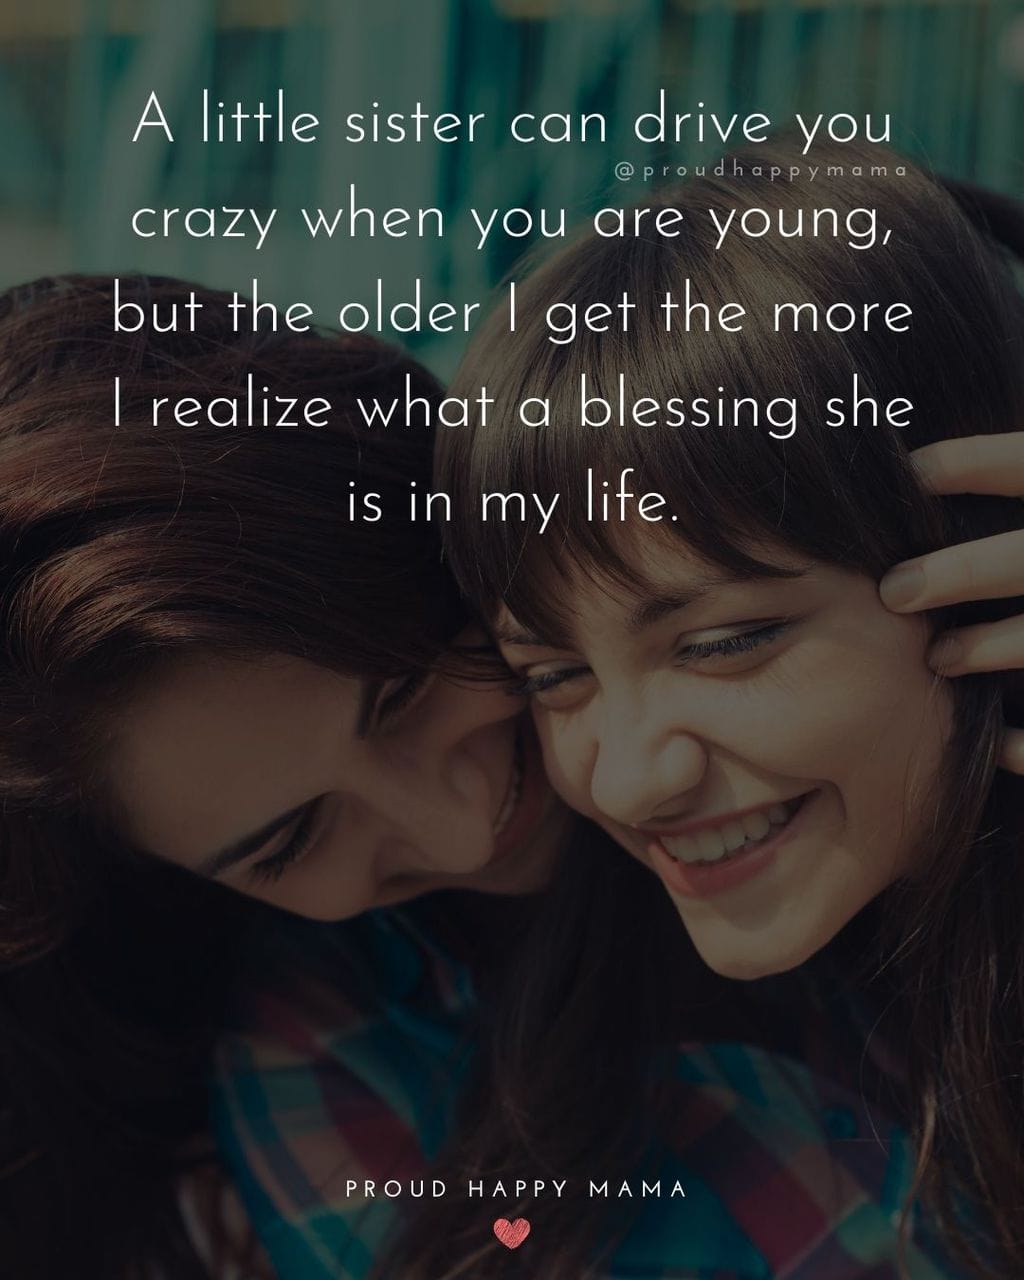 Little Sister Quotes - A little sister can drive you crazy when you are young, but the older I get the more I realize what a blessing she is in my life.